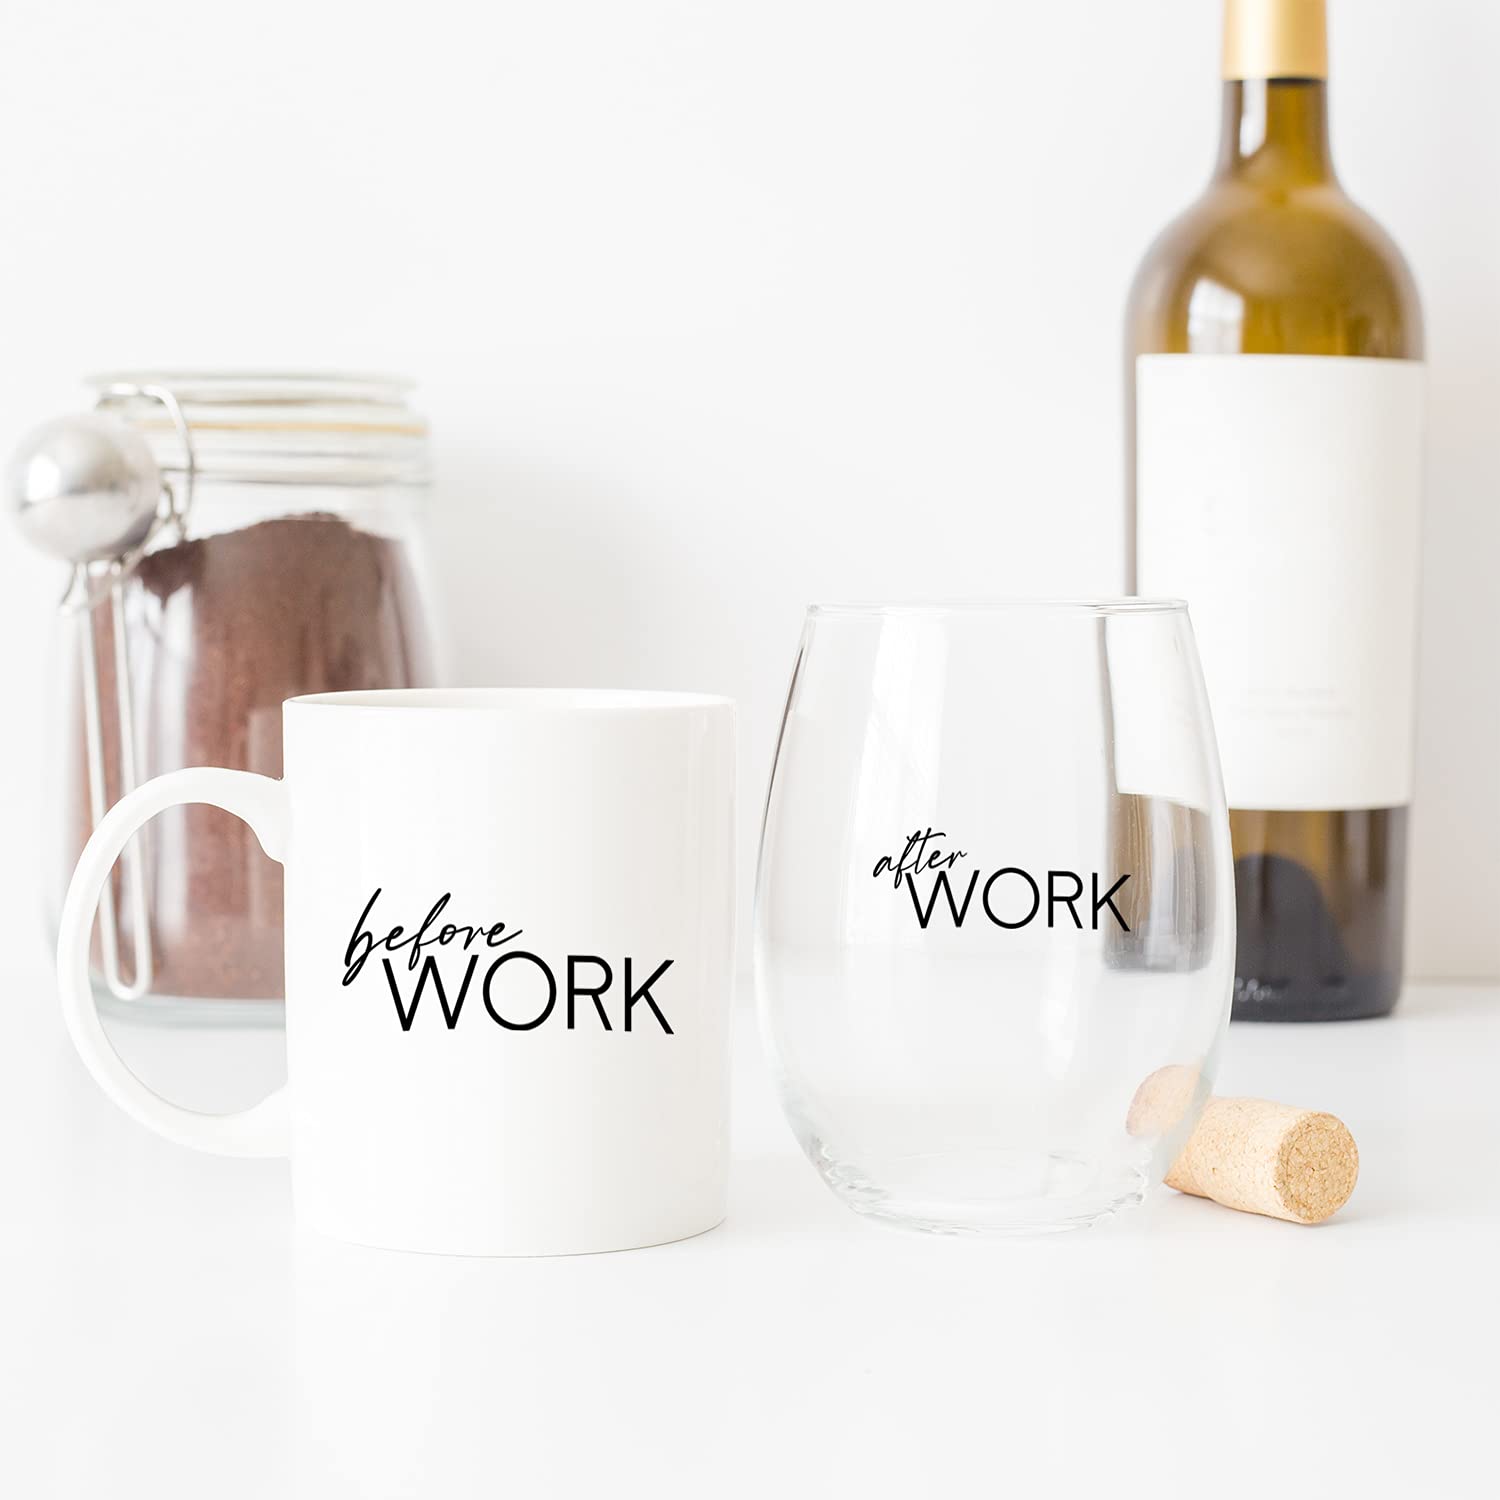 Canopy Street Before Work And After Work Mug And Stemless Wine Glass Set/Funny Clever Humor Drinkware/Coworker Coffee Mug Present/New Job Beverage Gift